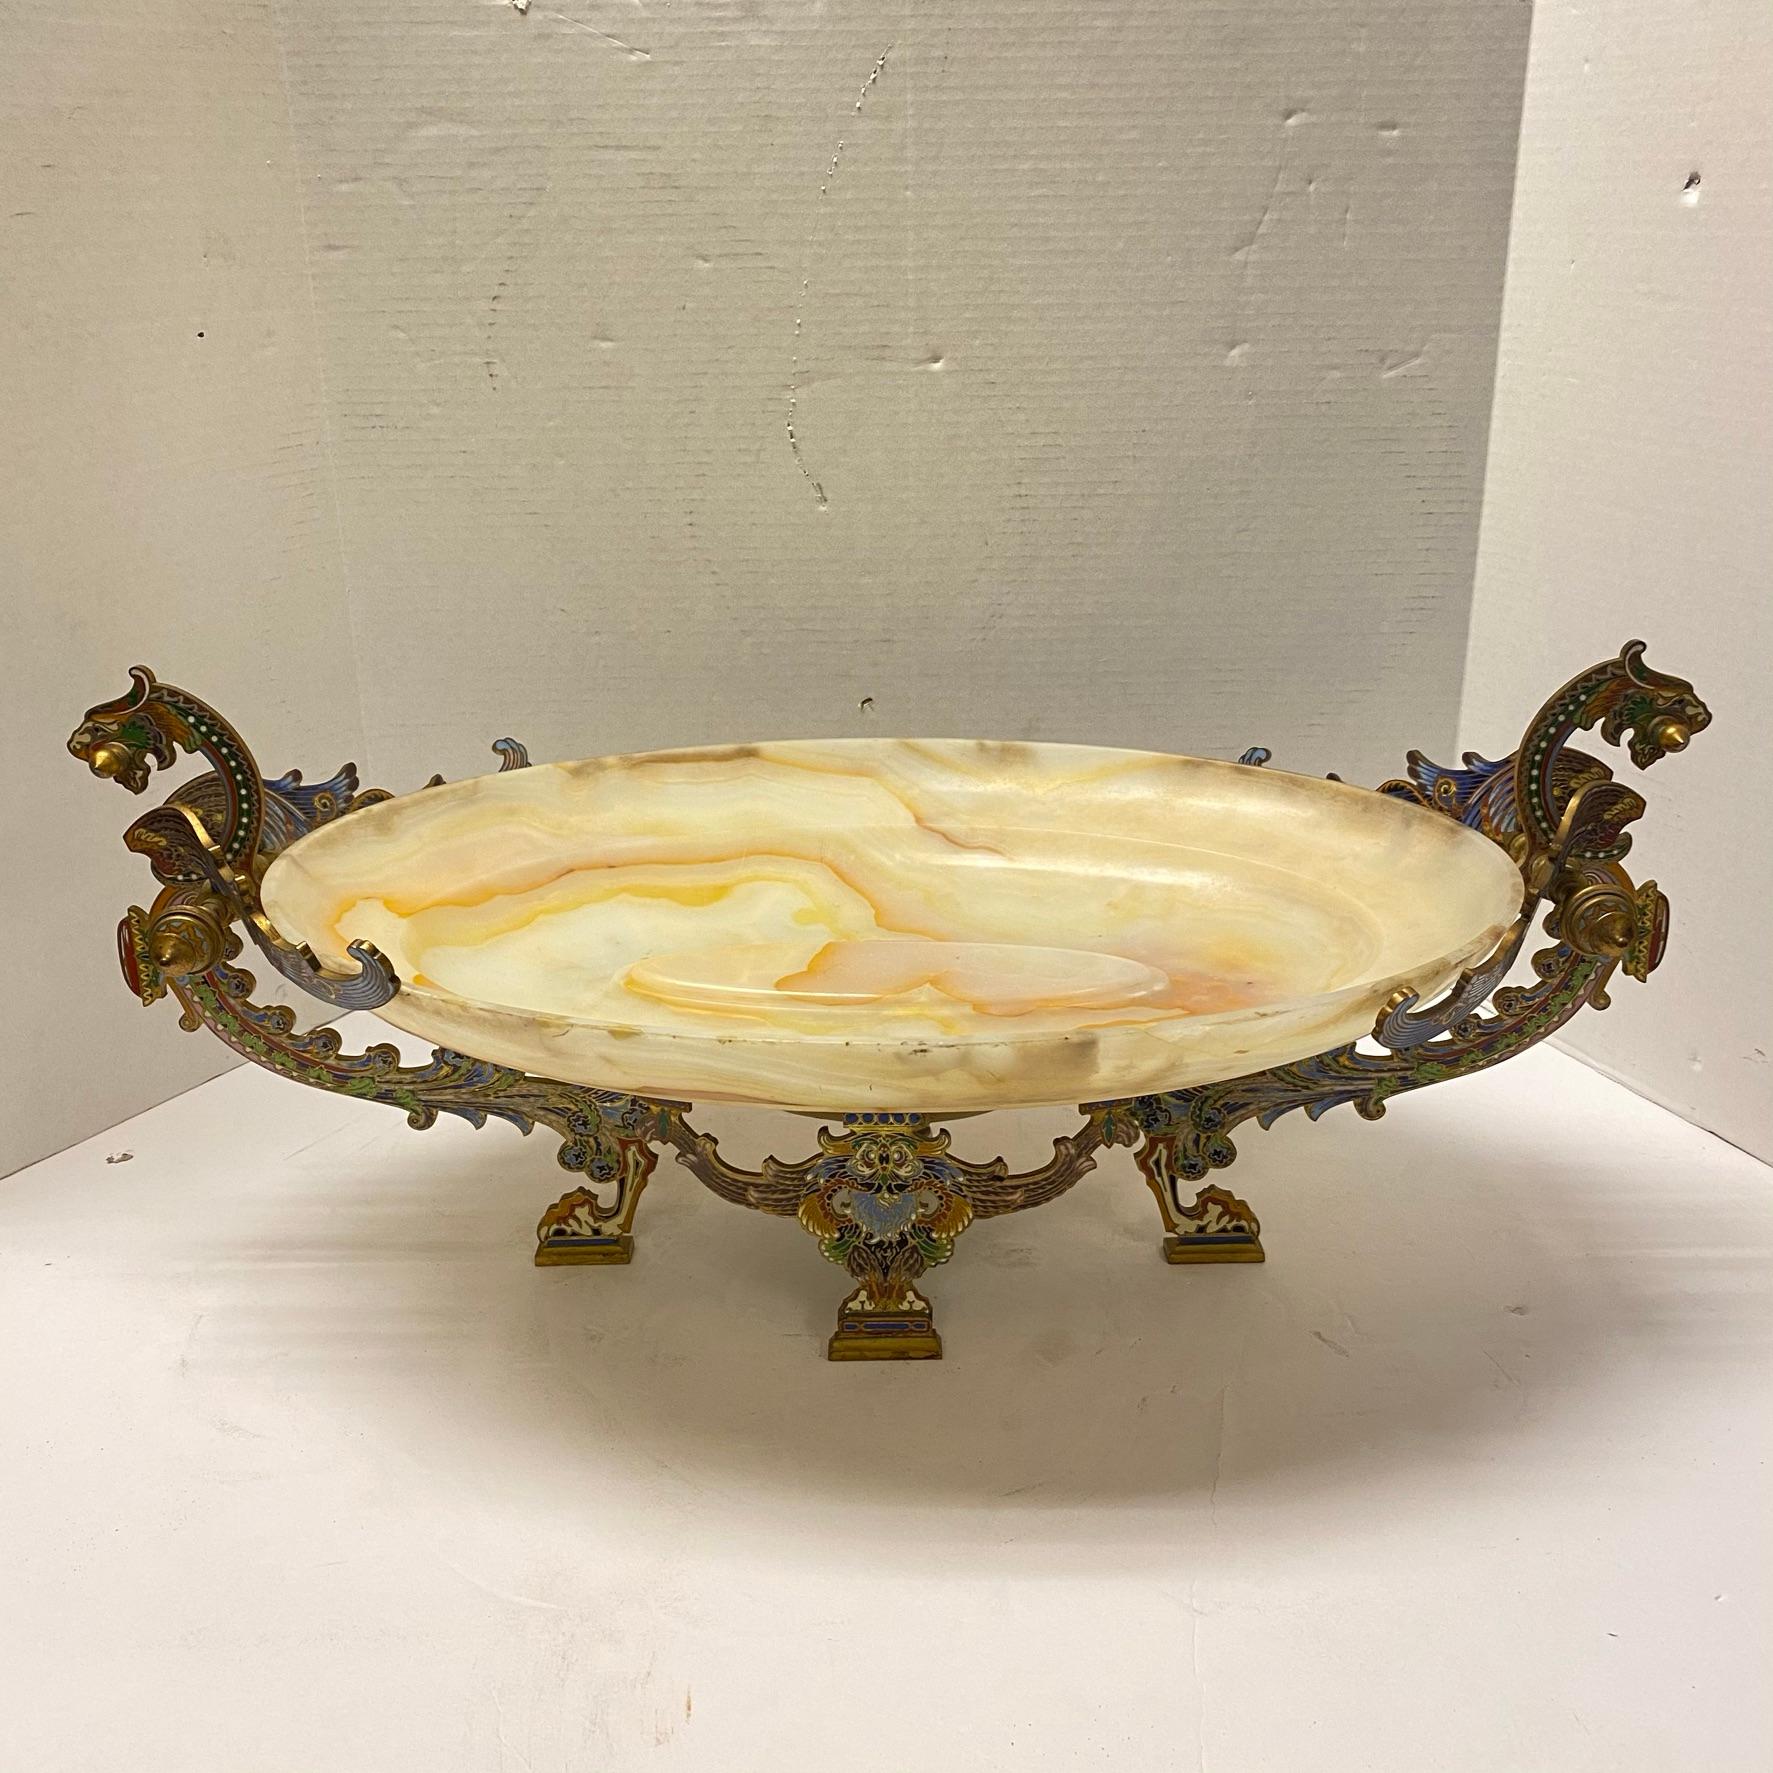 Very fine quality French 19 century large Champleve enamel bronze mounted onyx centerpiece bowl.